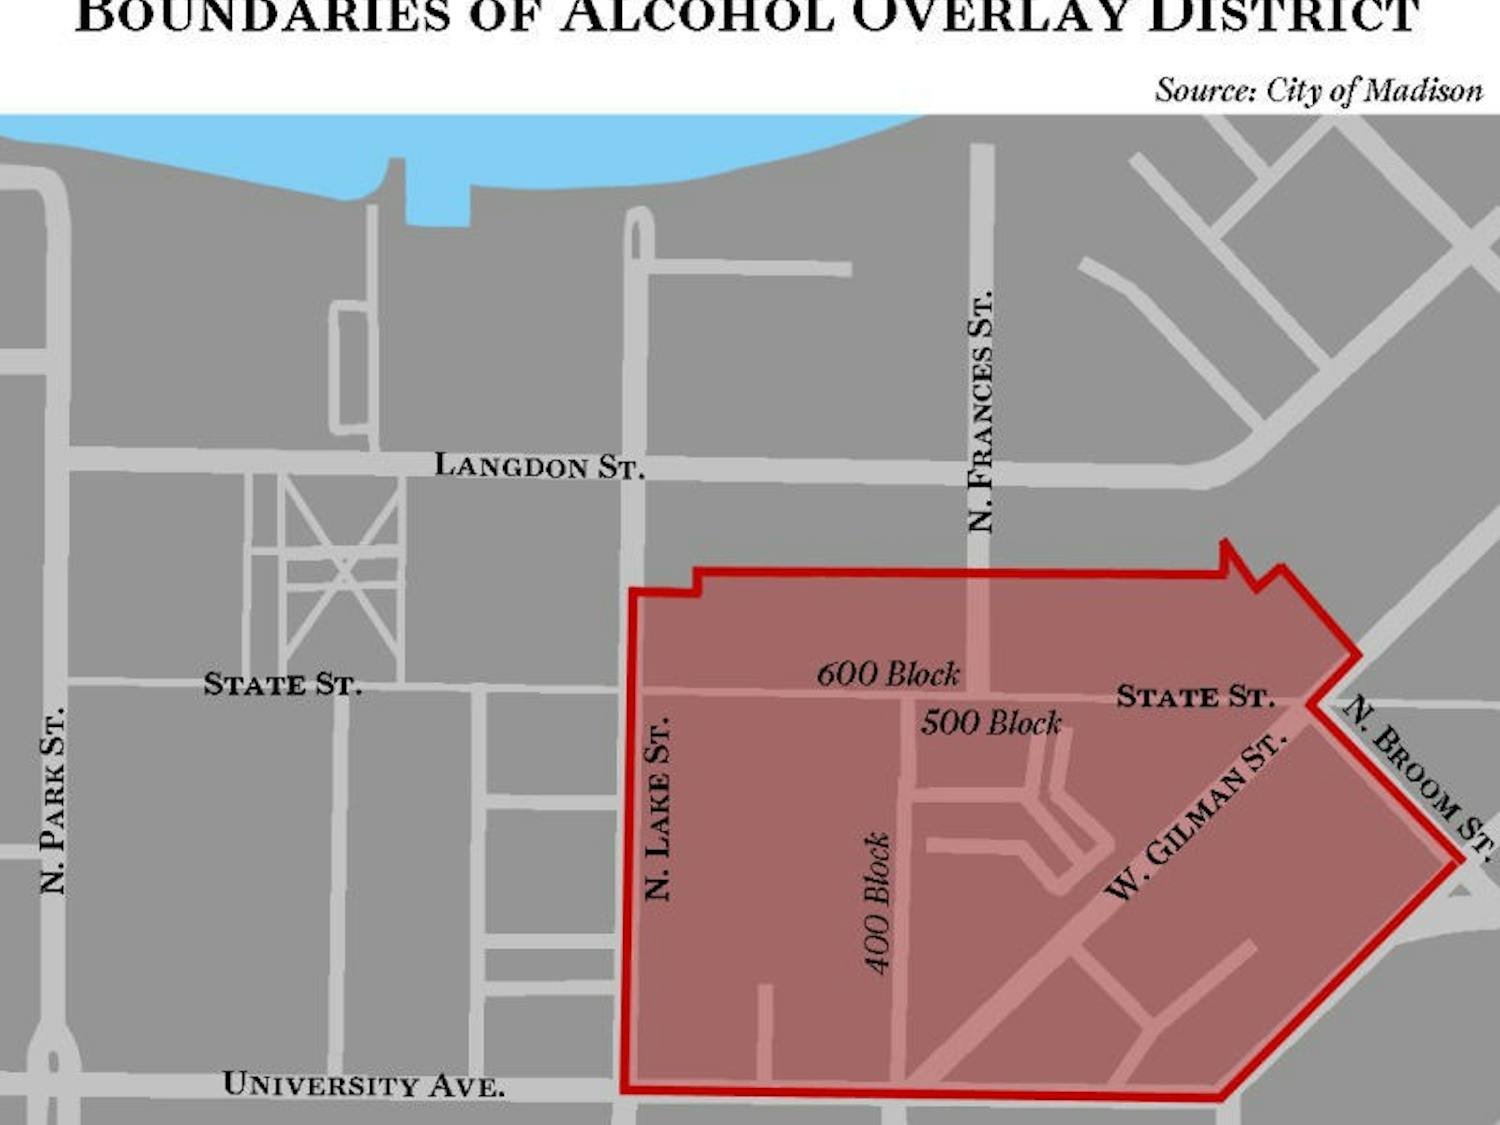 Alcohol Overlay District